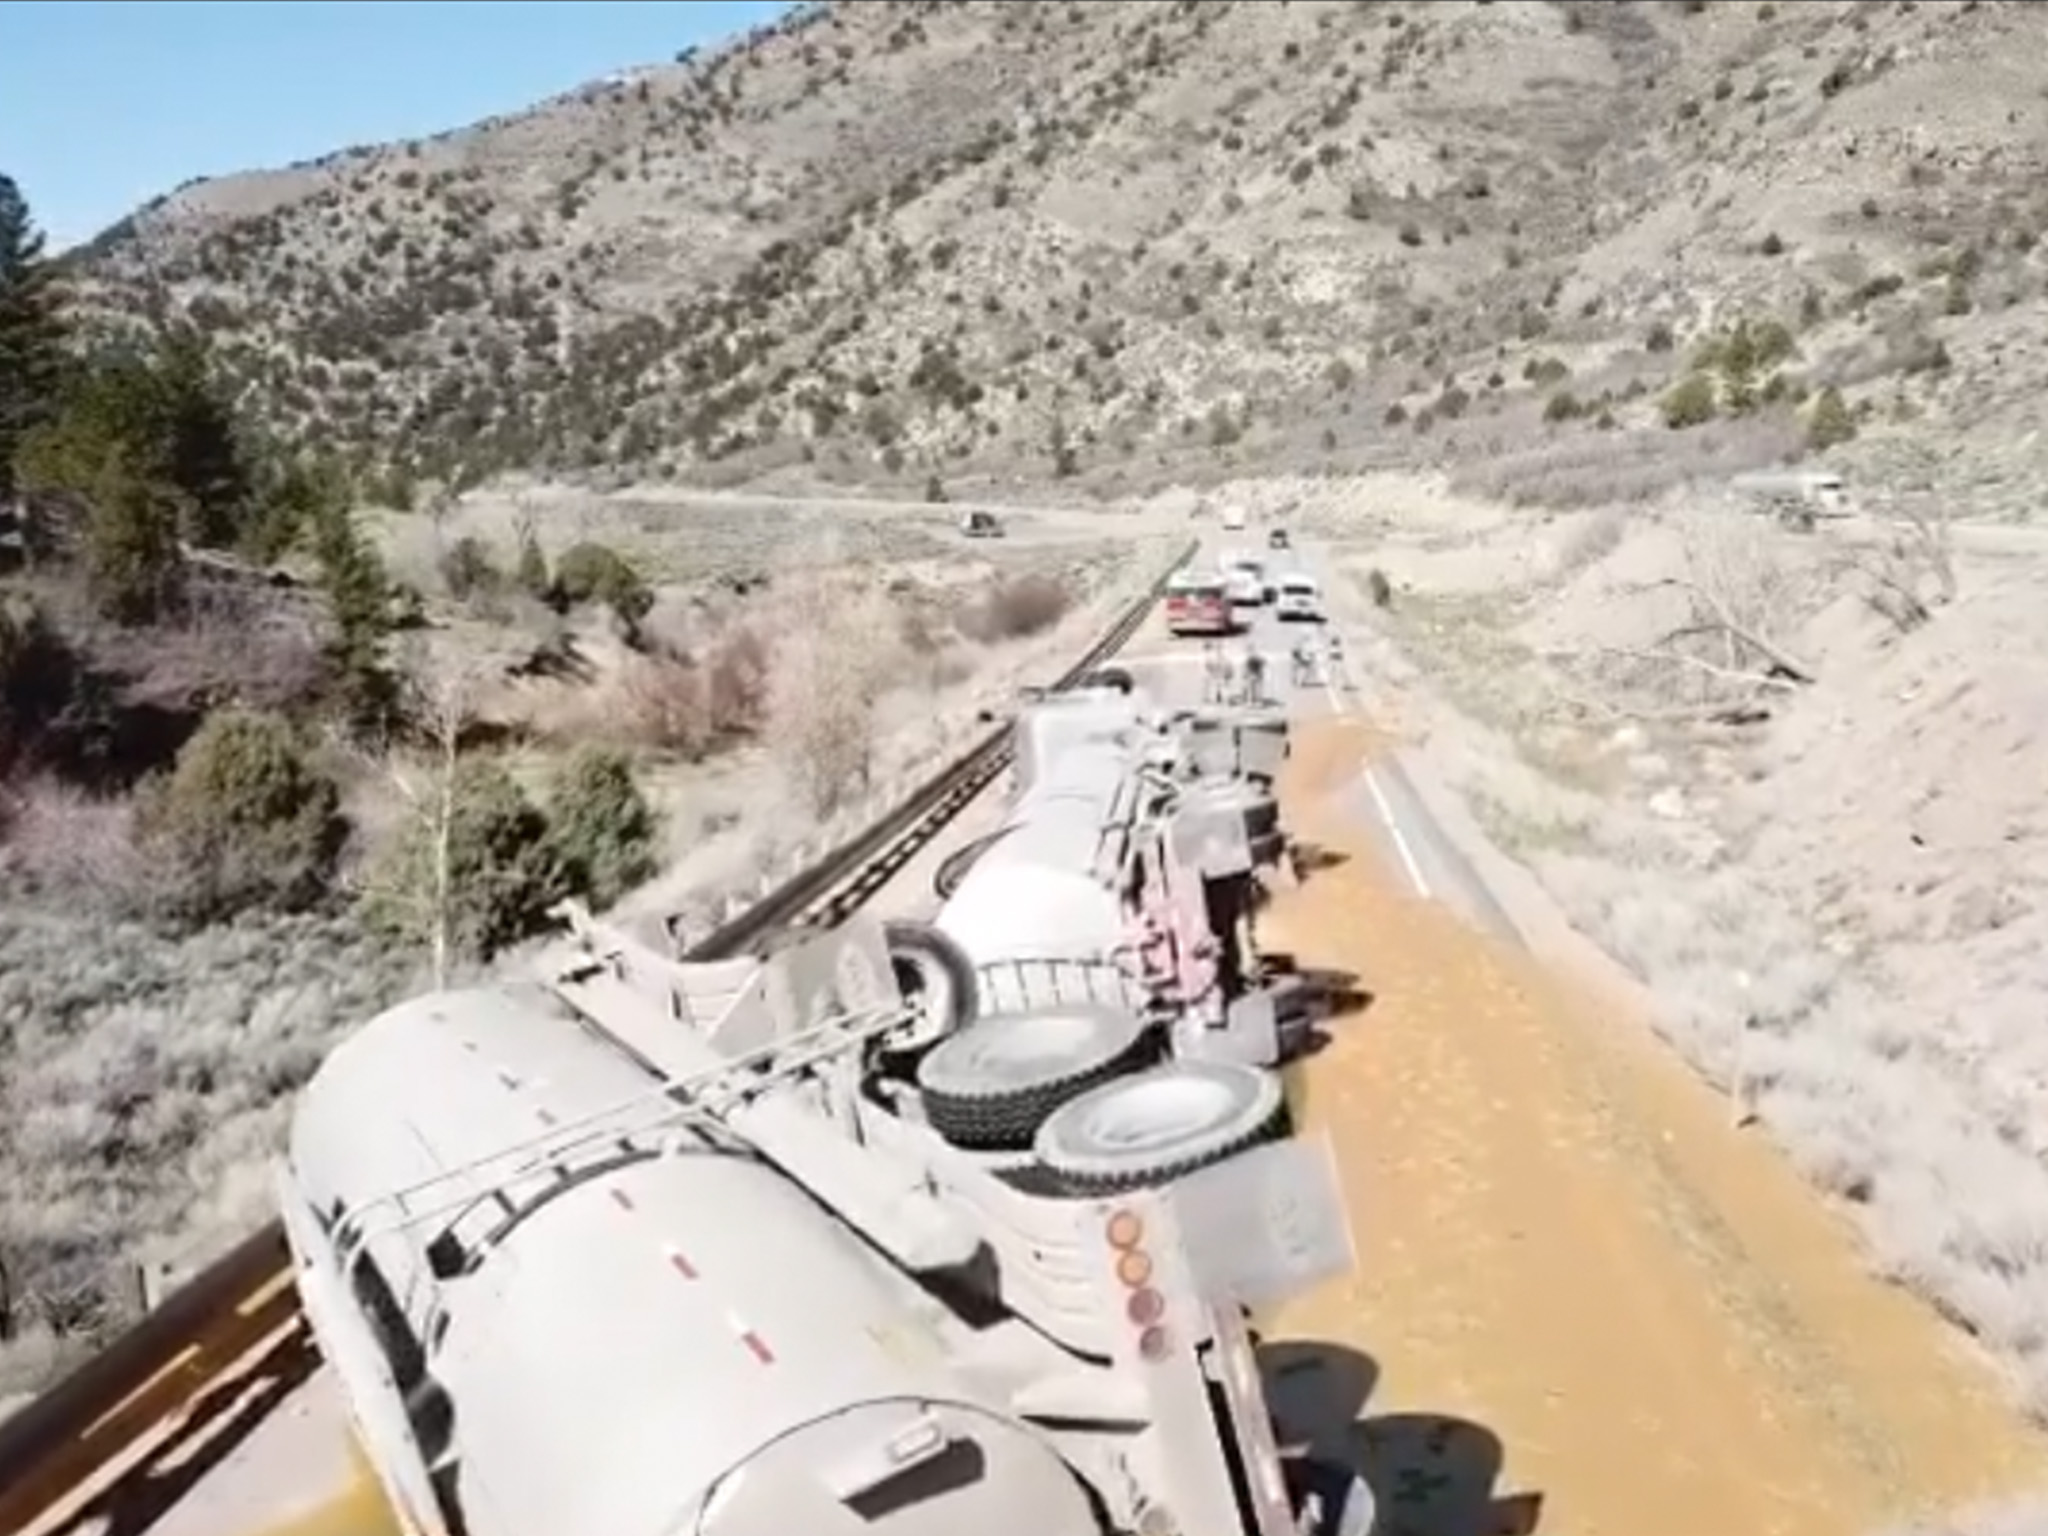 Drone photo shows aerial view of a tanker truck that tipped over on a roadway and is blocking all lanes.